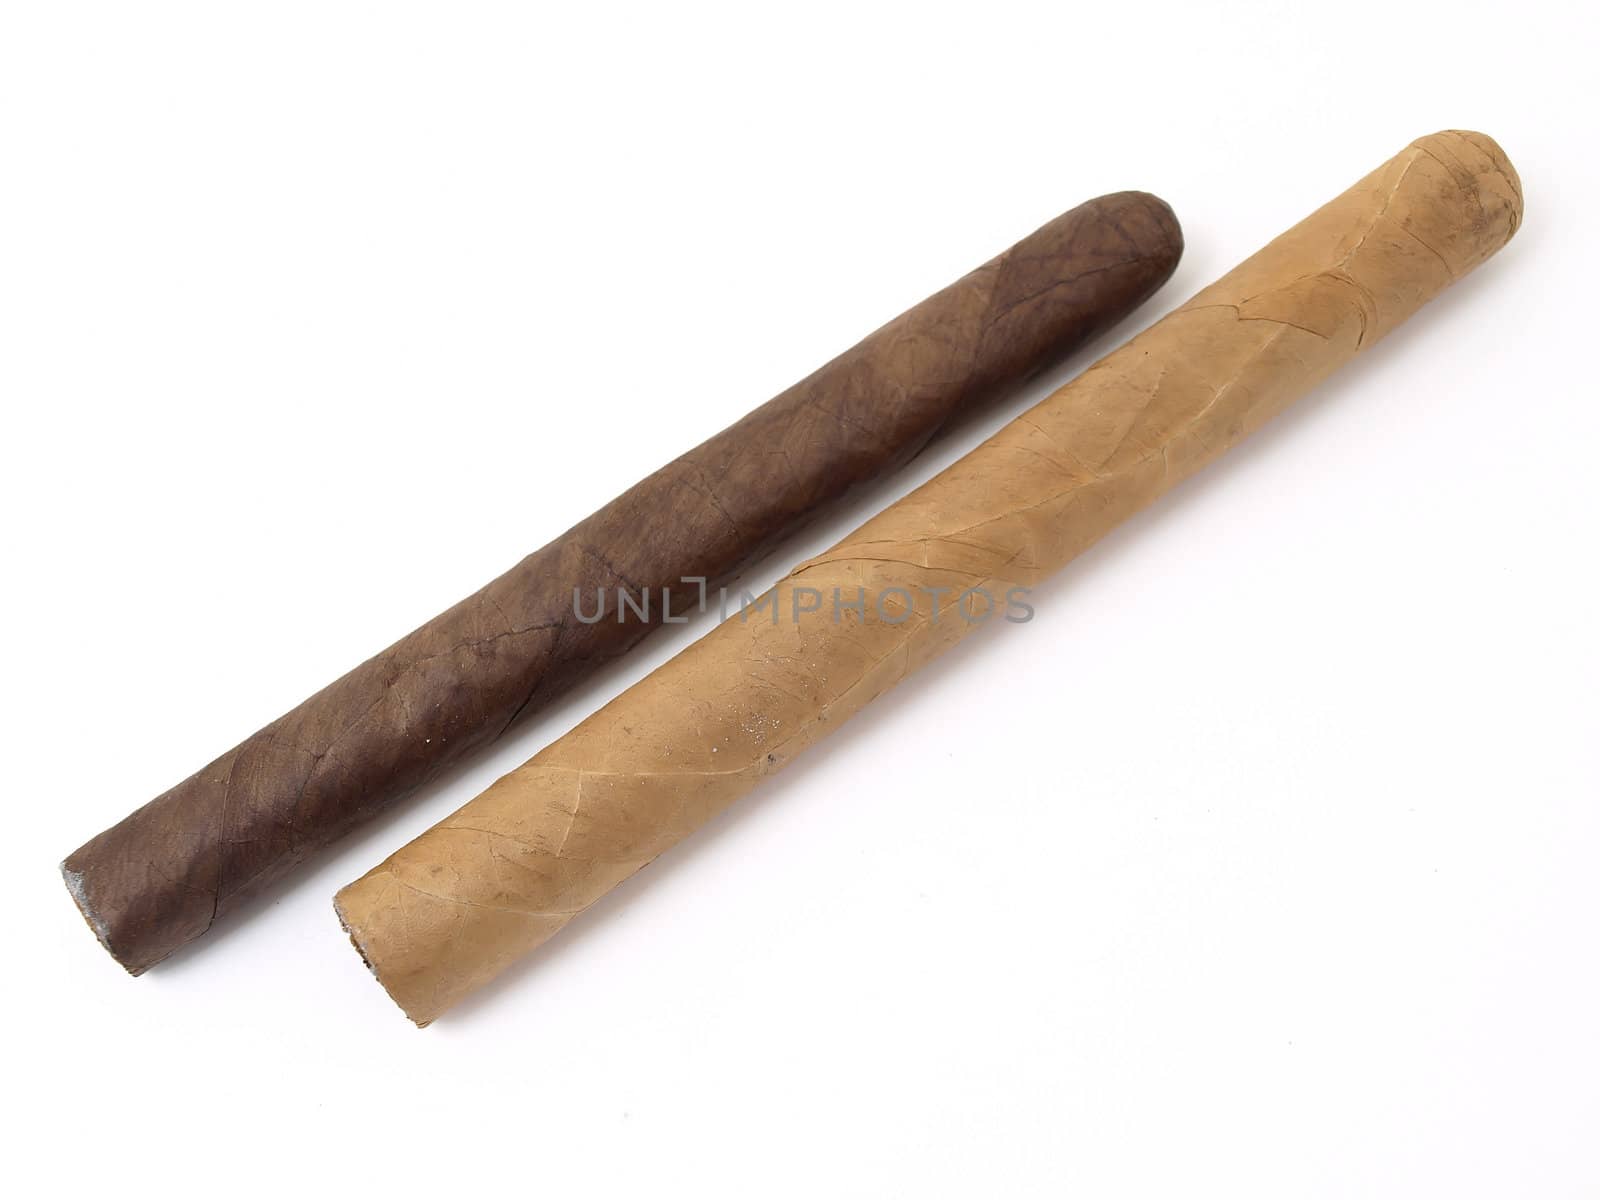 Two unlit cigars, studio isolated against a white background.